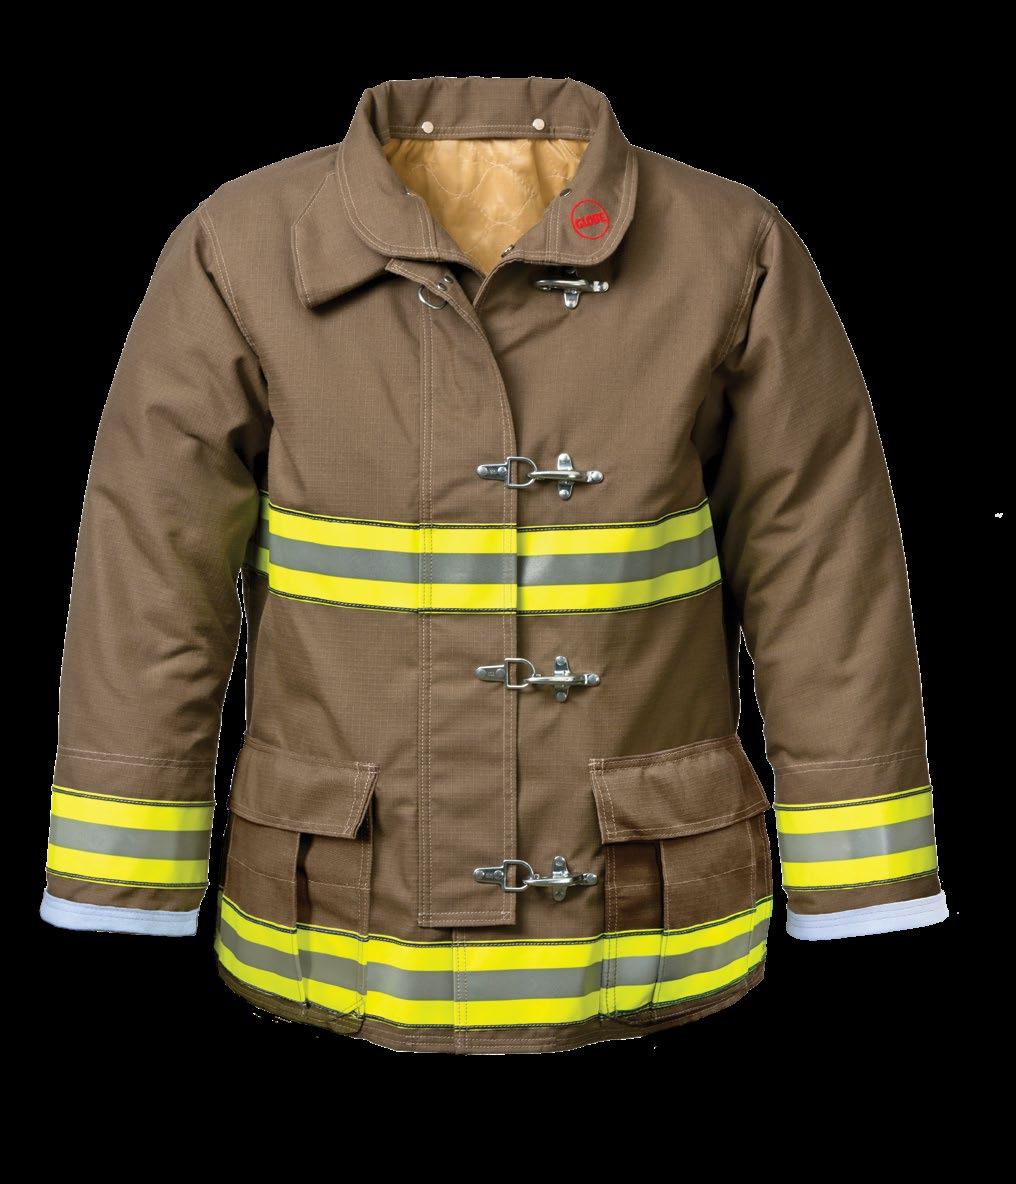 CLASSIX JACKET CLASSIX METRO JACKET This metro-inspired option set includes an extended back for additional overlap and lettering below the SCBA, expansion pockets, and telescoping sleeve band with